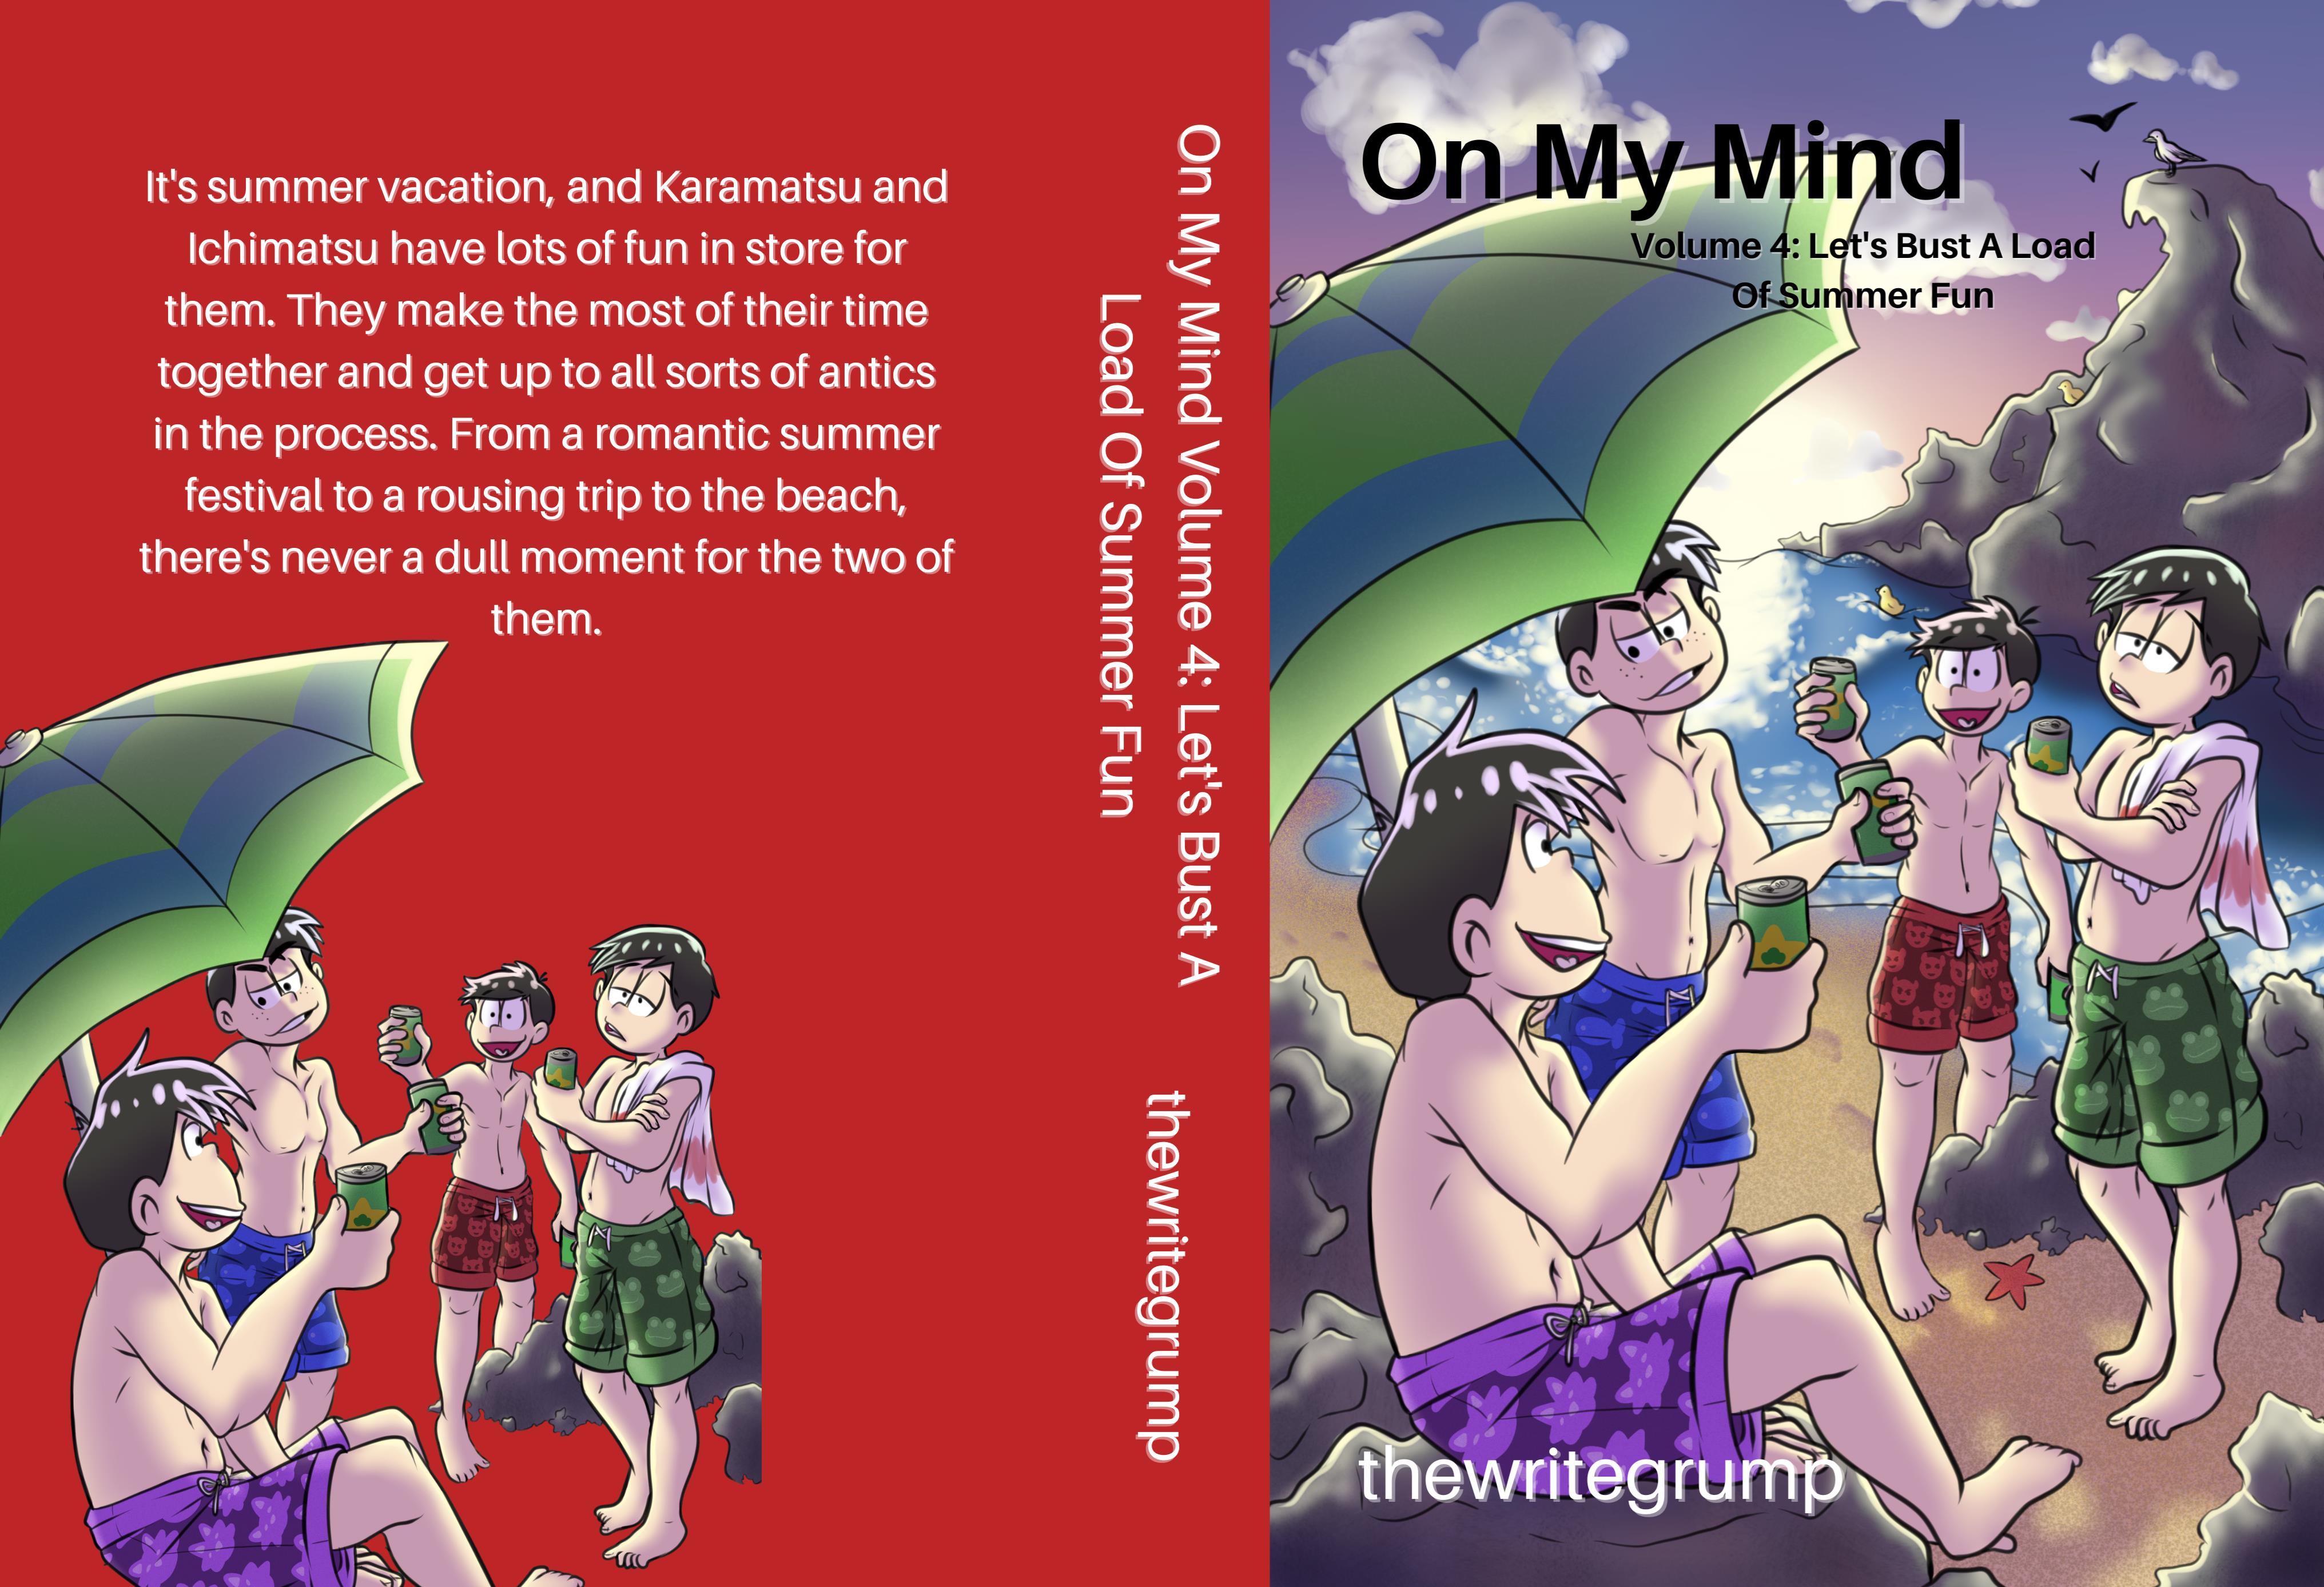 On My Mind Volume 4 cover image